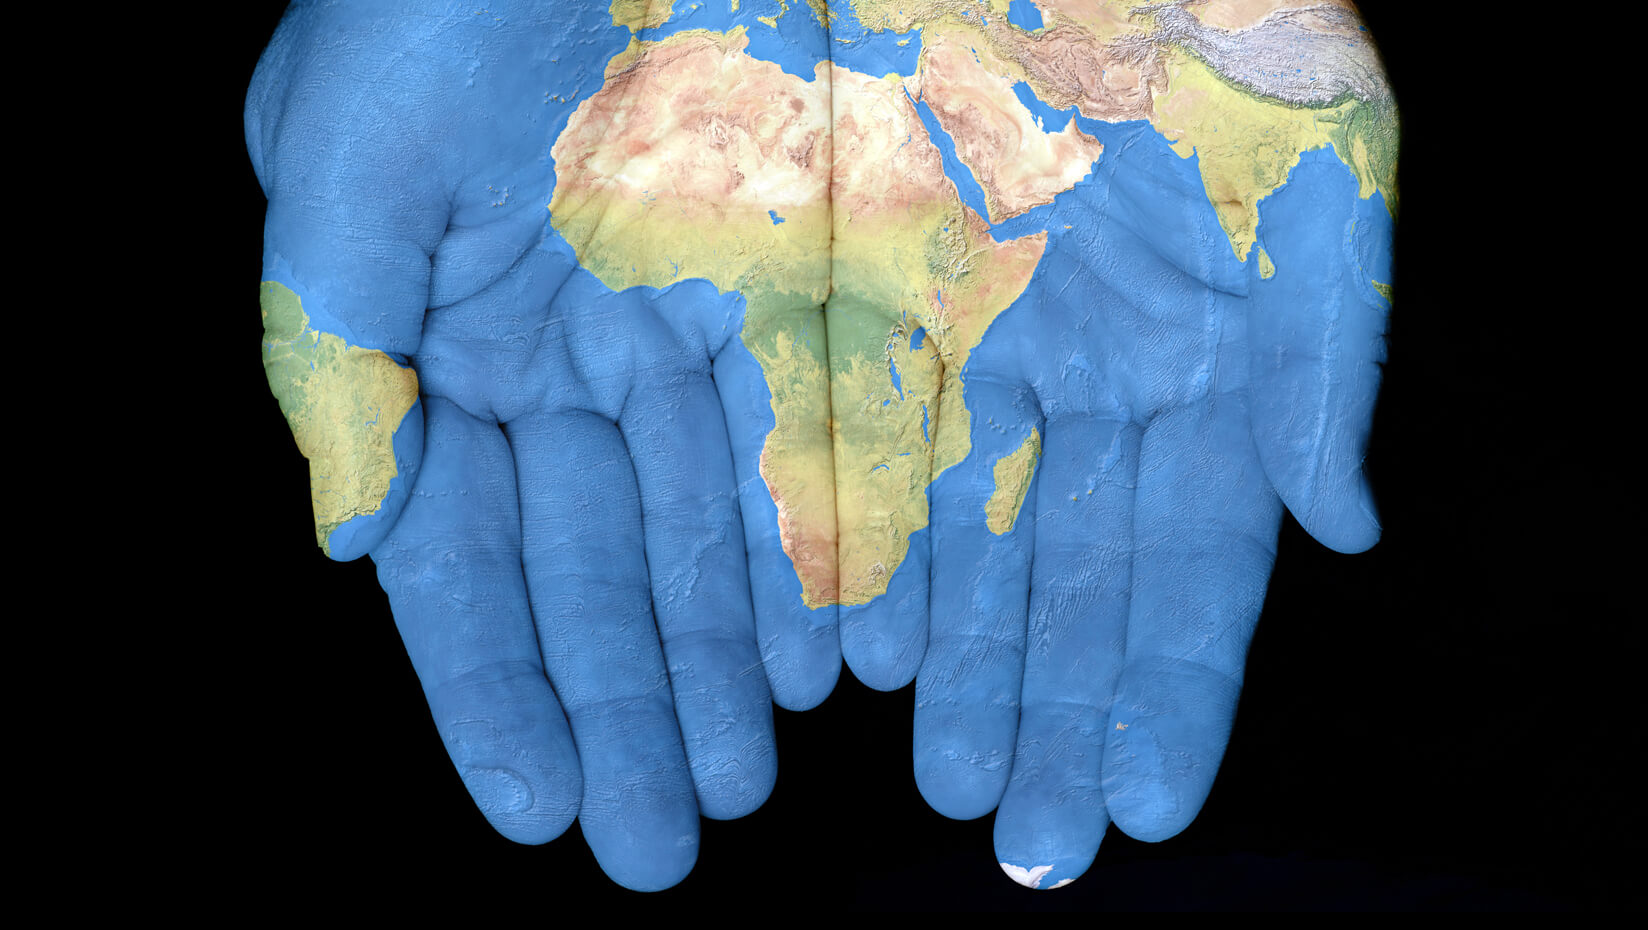 Hands showing a map of Africa